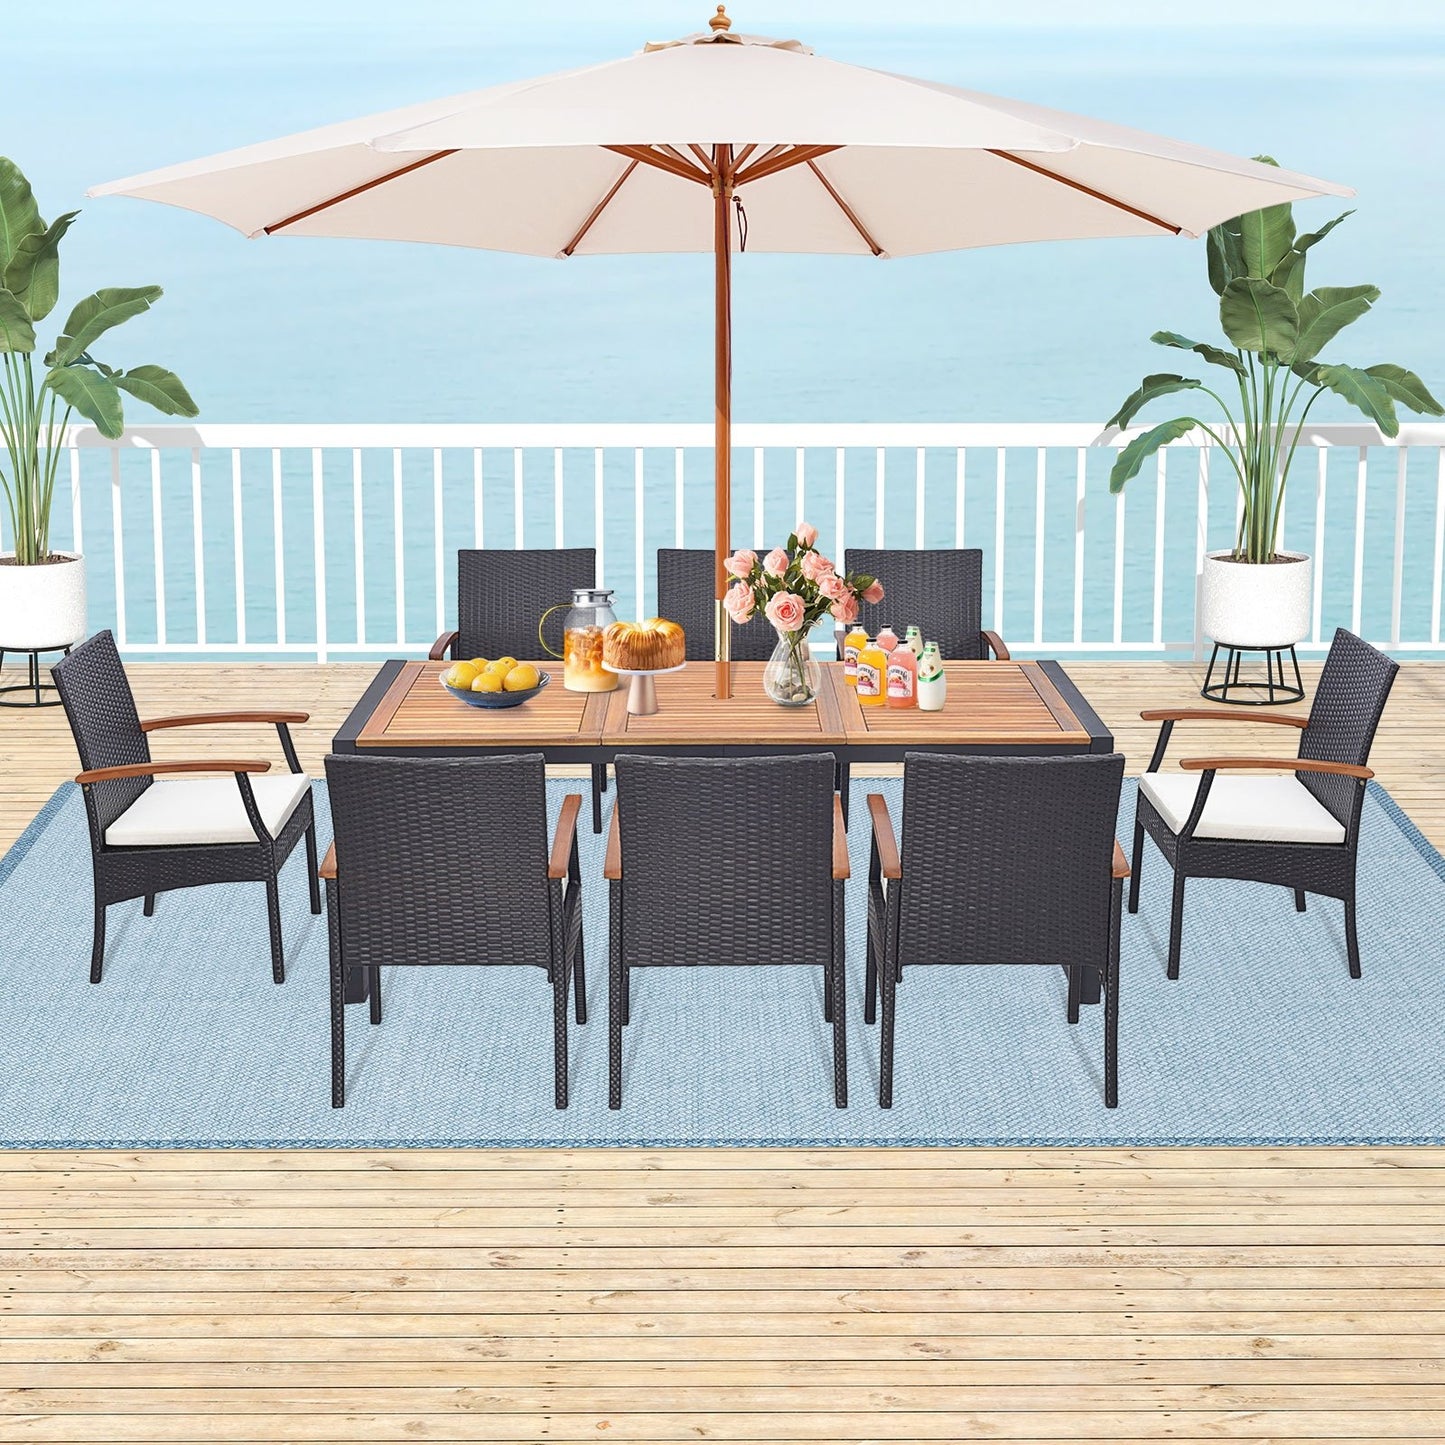 9 Pieces  Patio Rattan Dining Set with Acacia Wood Table for Backyard  Garden-Wood Handrail